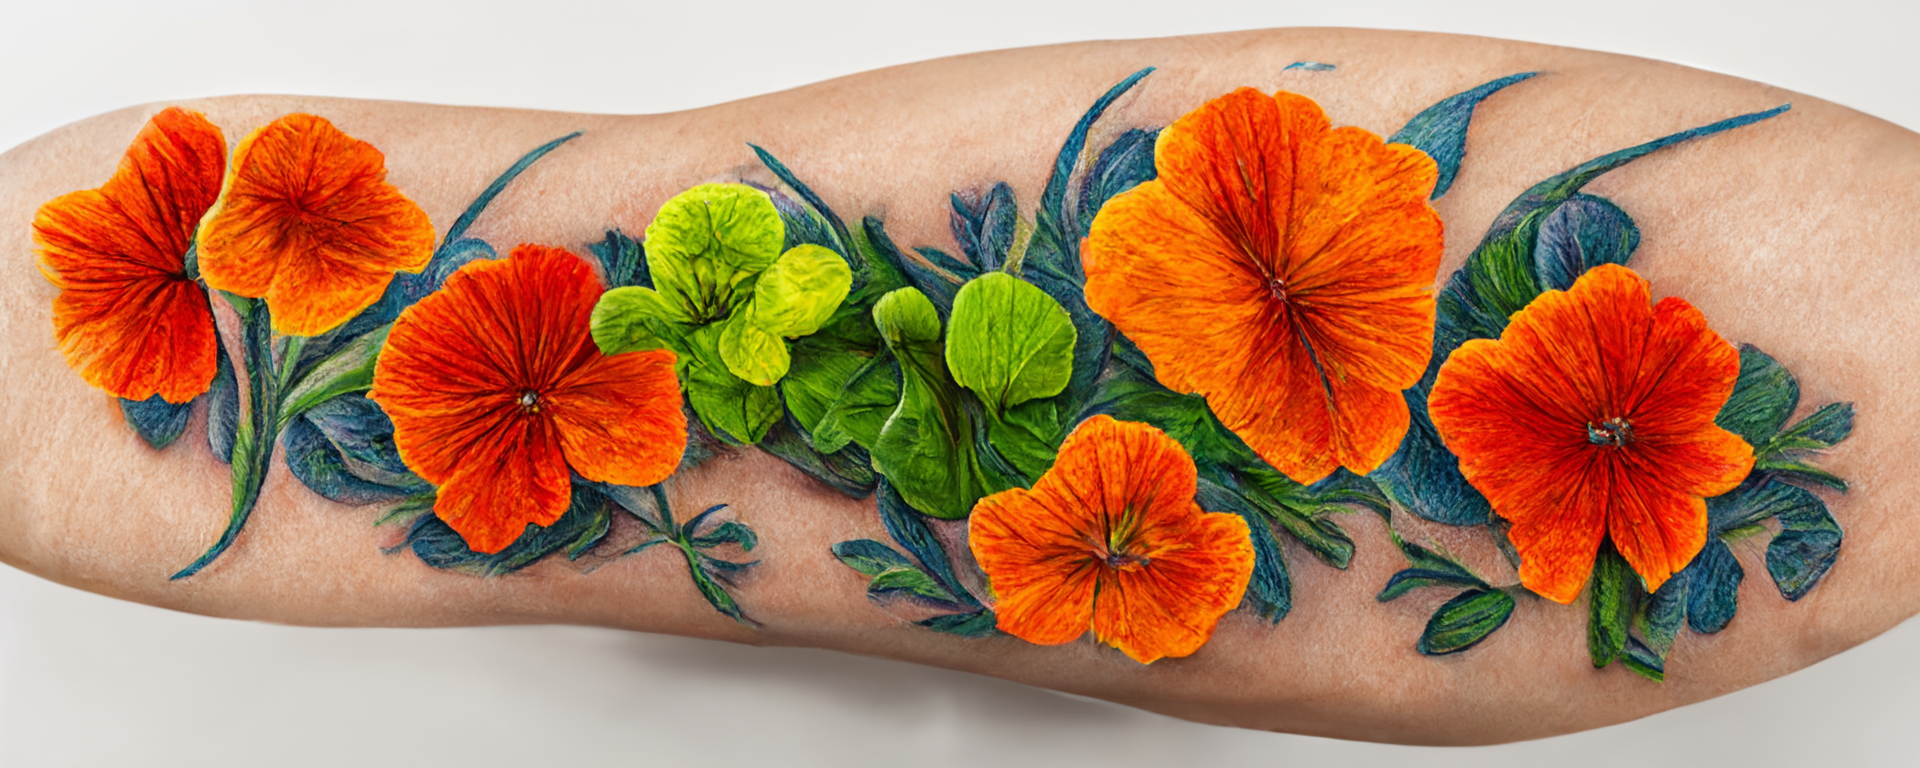 Nasturtium tattoo from my up for grabs! Thanks for coming in, Amy!  #flowertattoo #nasturtium | Instagram